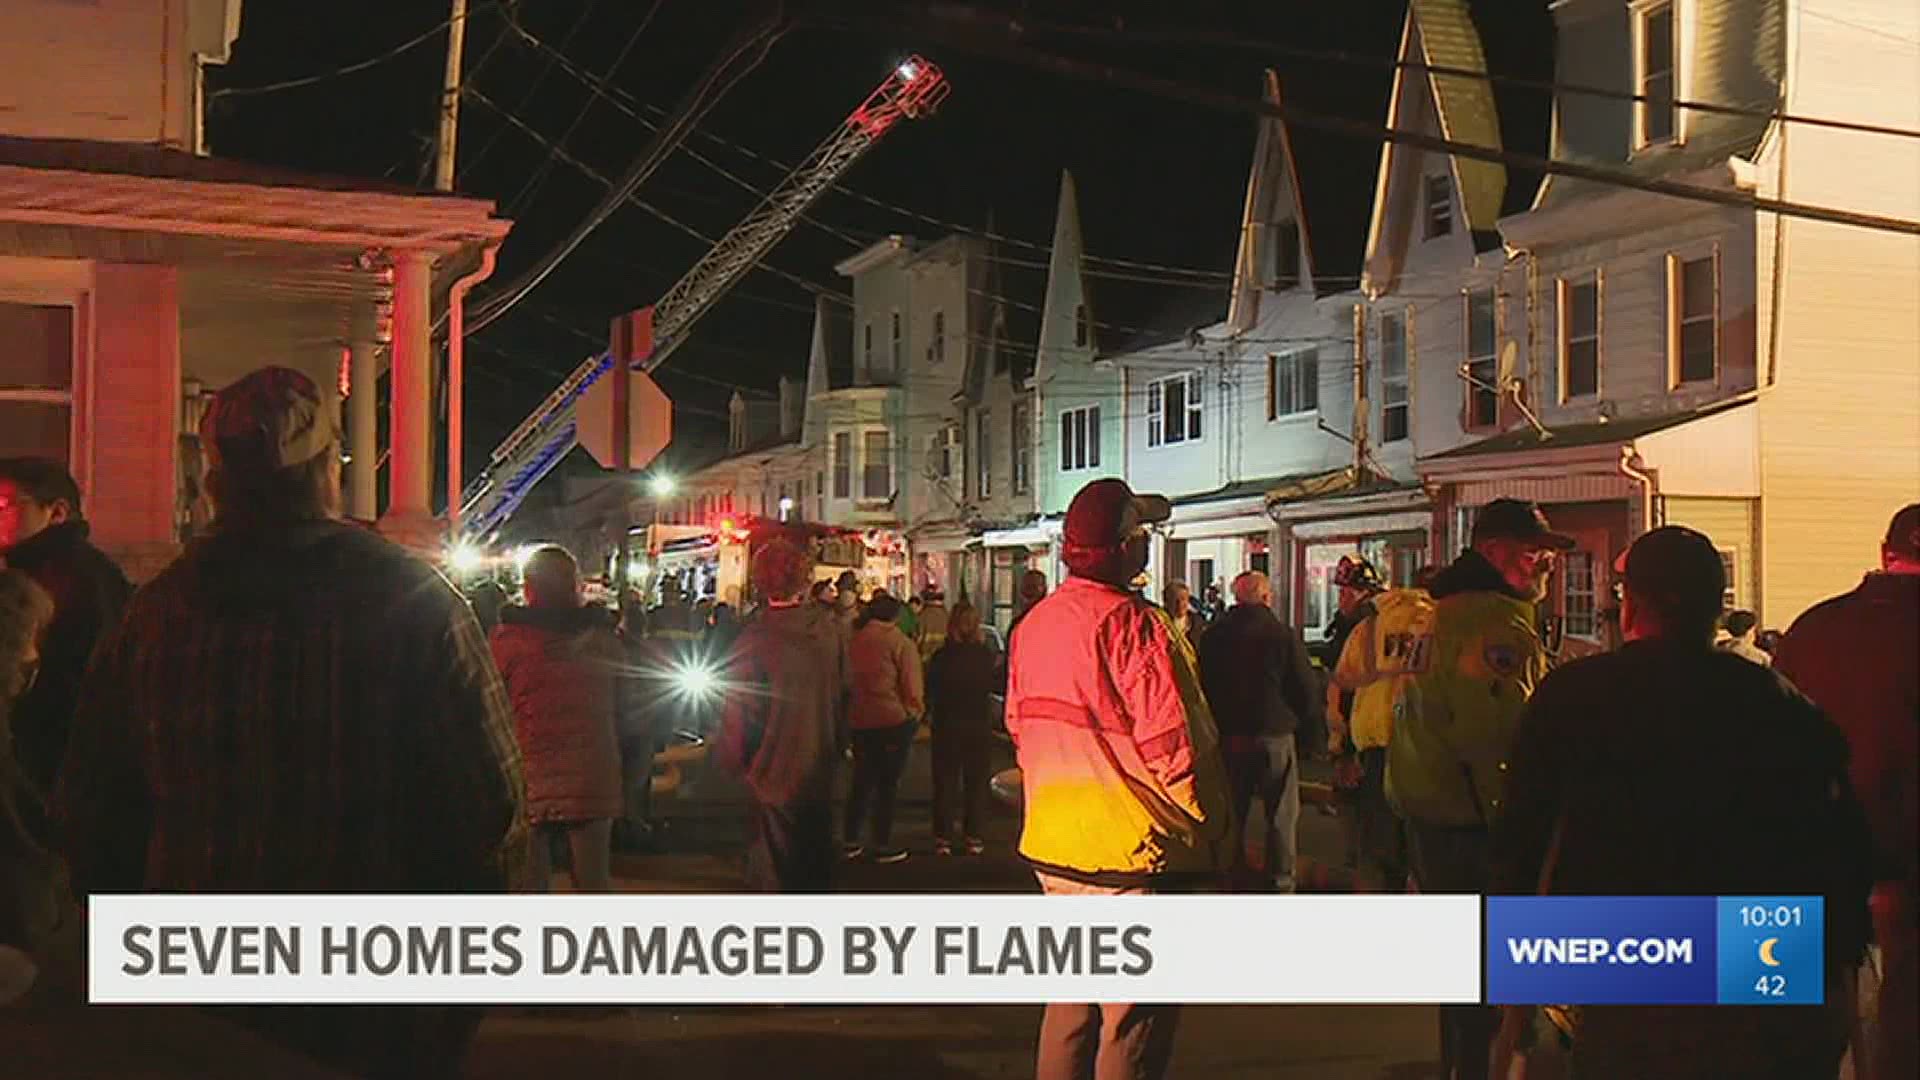 Fire officials say flames broke out along the 200 block of East Pine Street in Mahanoy City around 6:30 p.m. Saturday.